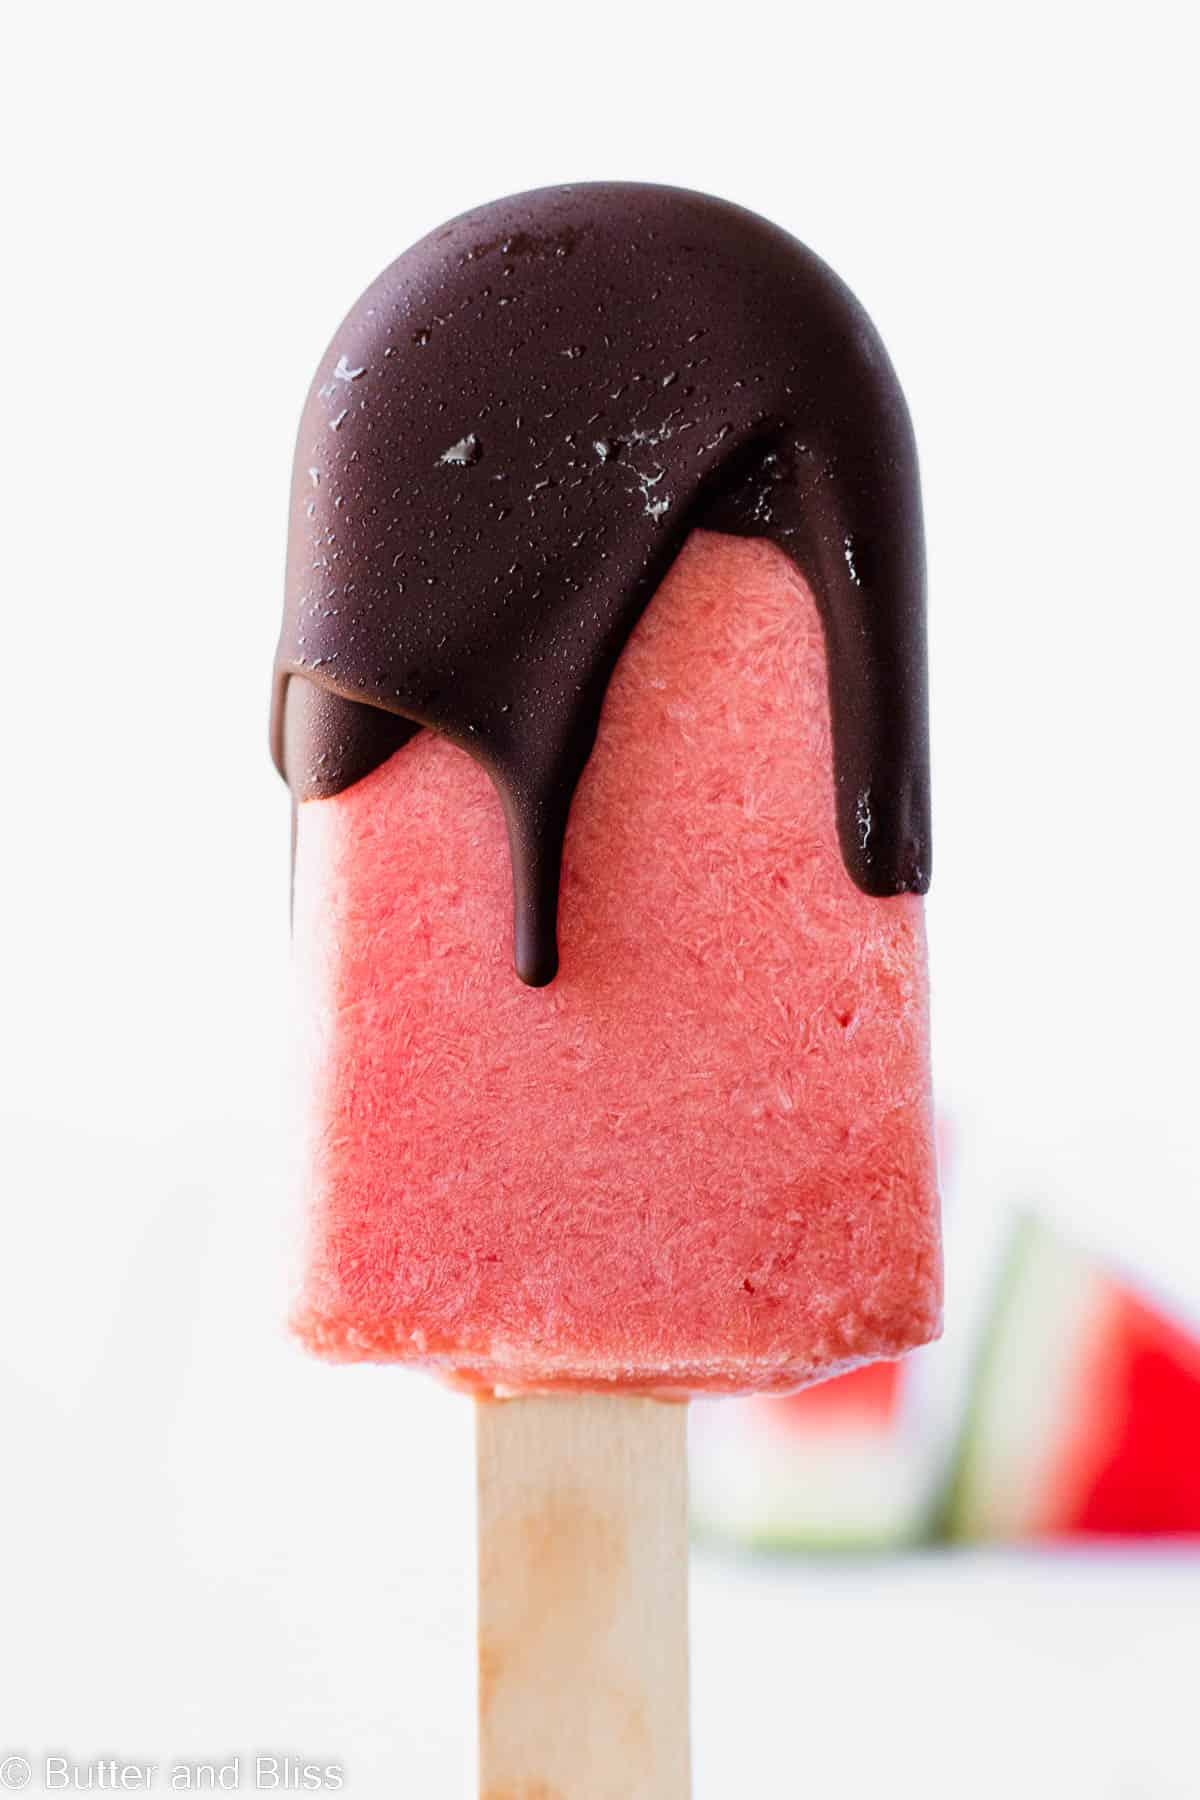 Single watermelon popsicle close up with drippy chocolate shell.